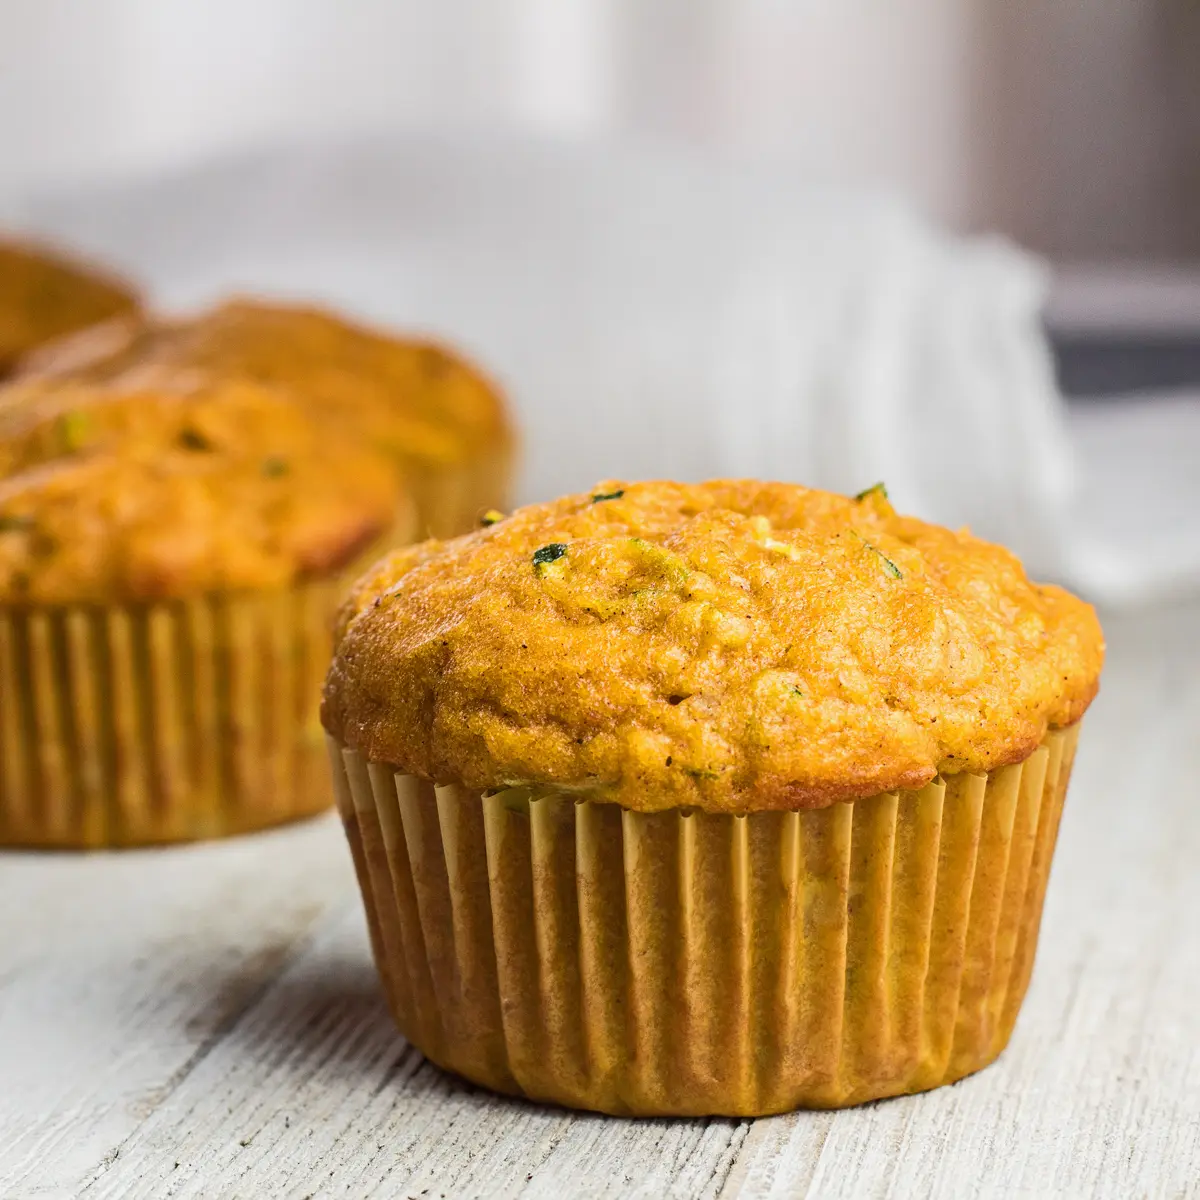 Large square image of pumpkin zucchini muffins on light background.